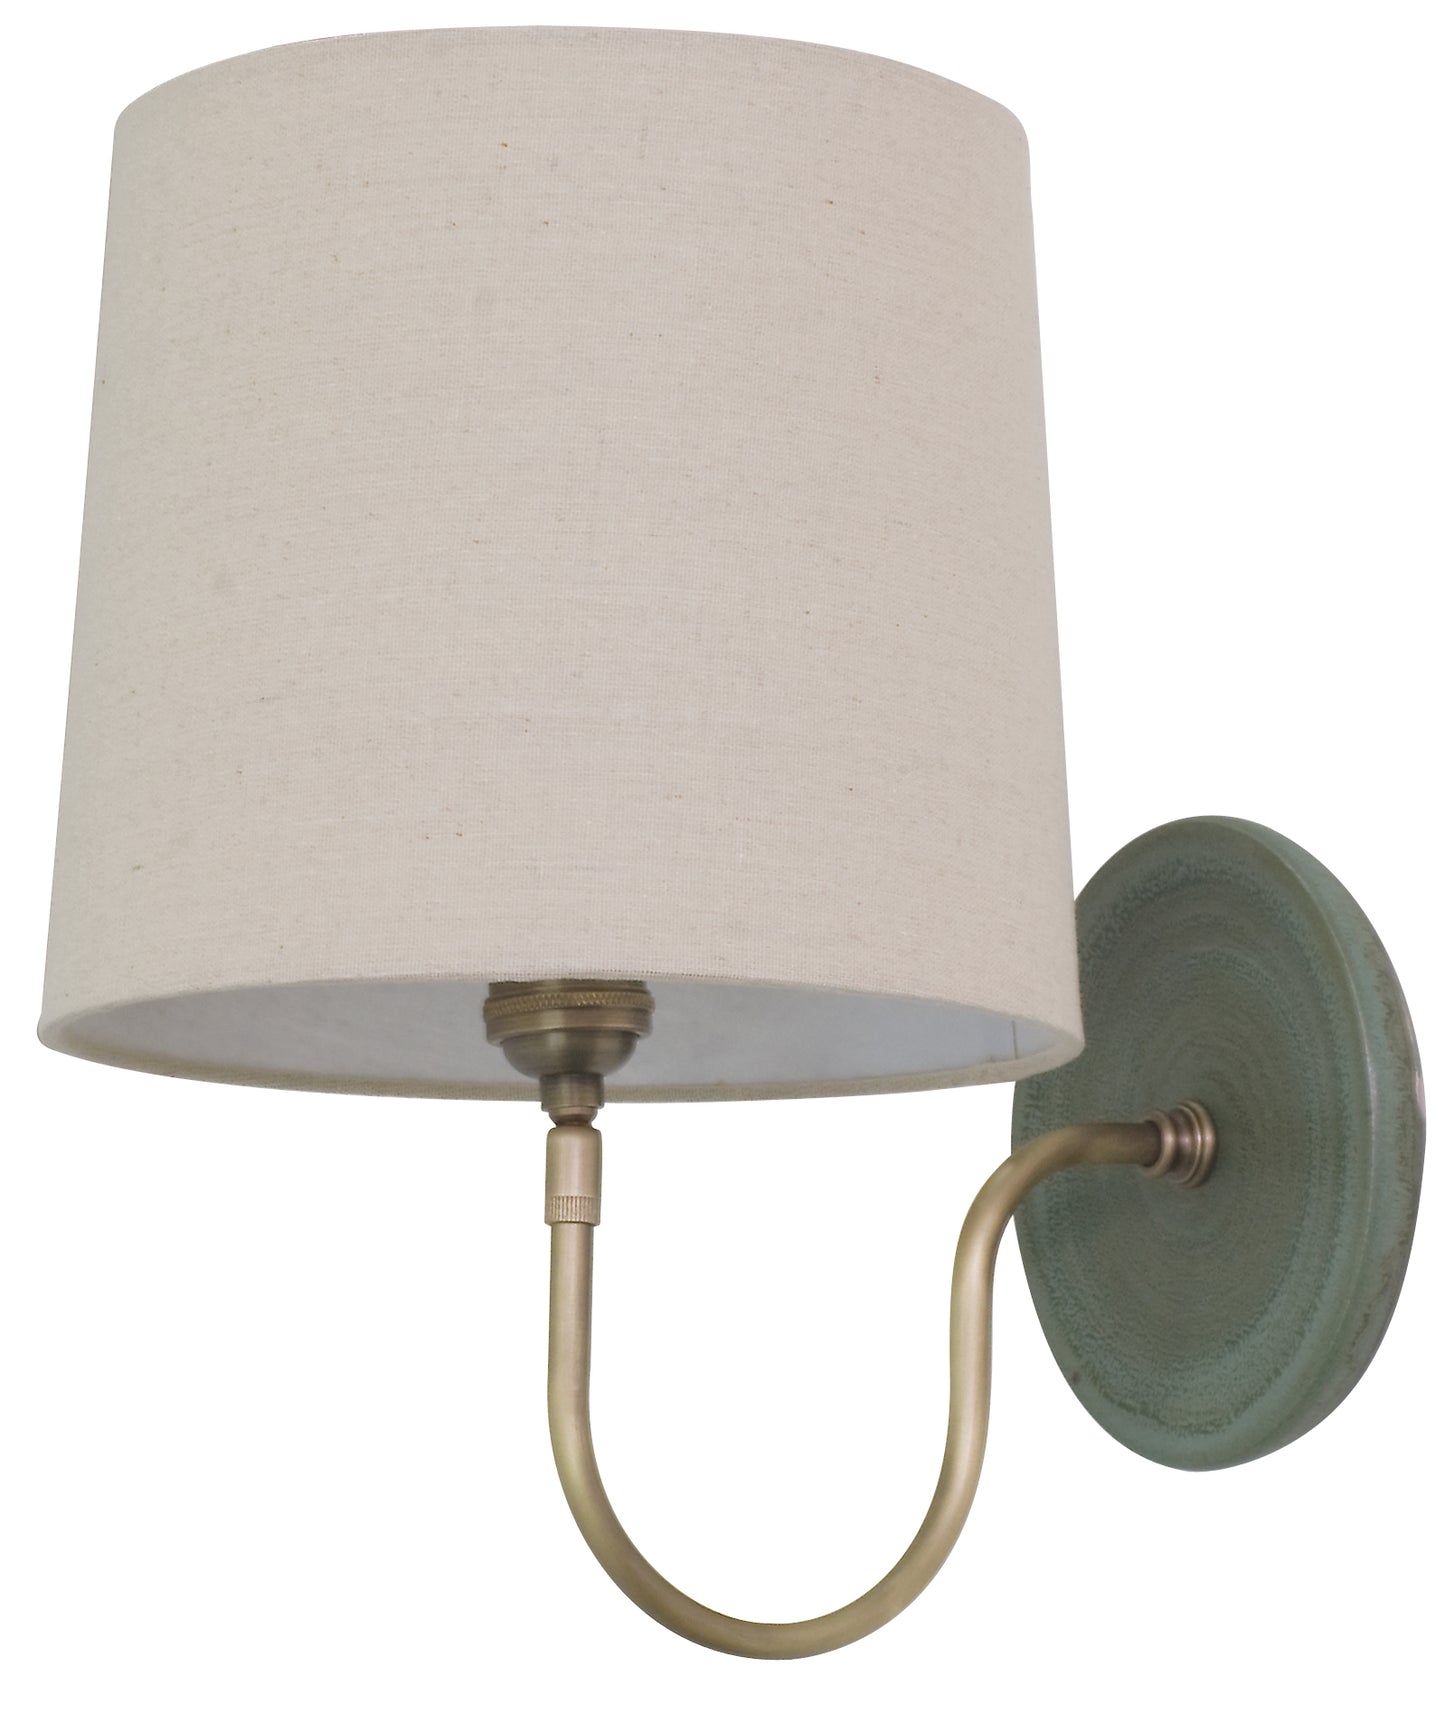 House of Troy Scatchard Wall Lamp in Green Matte GS725-GM